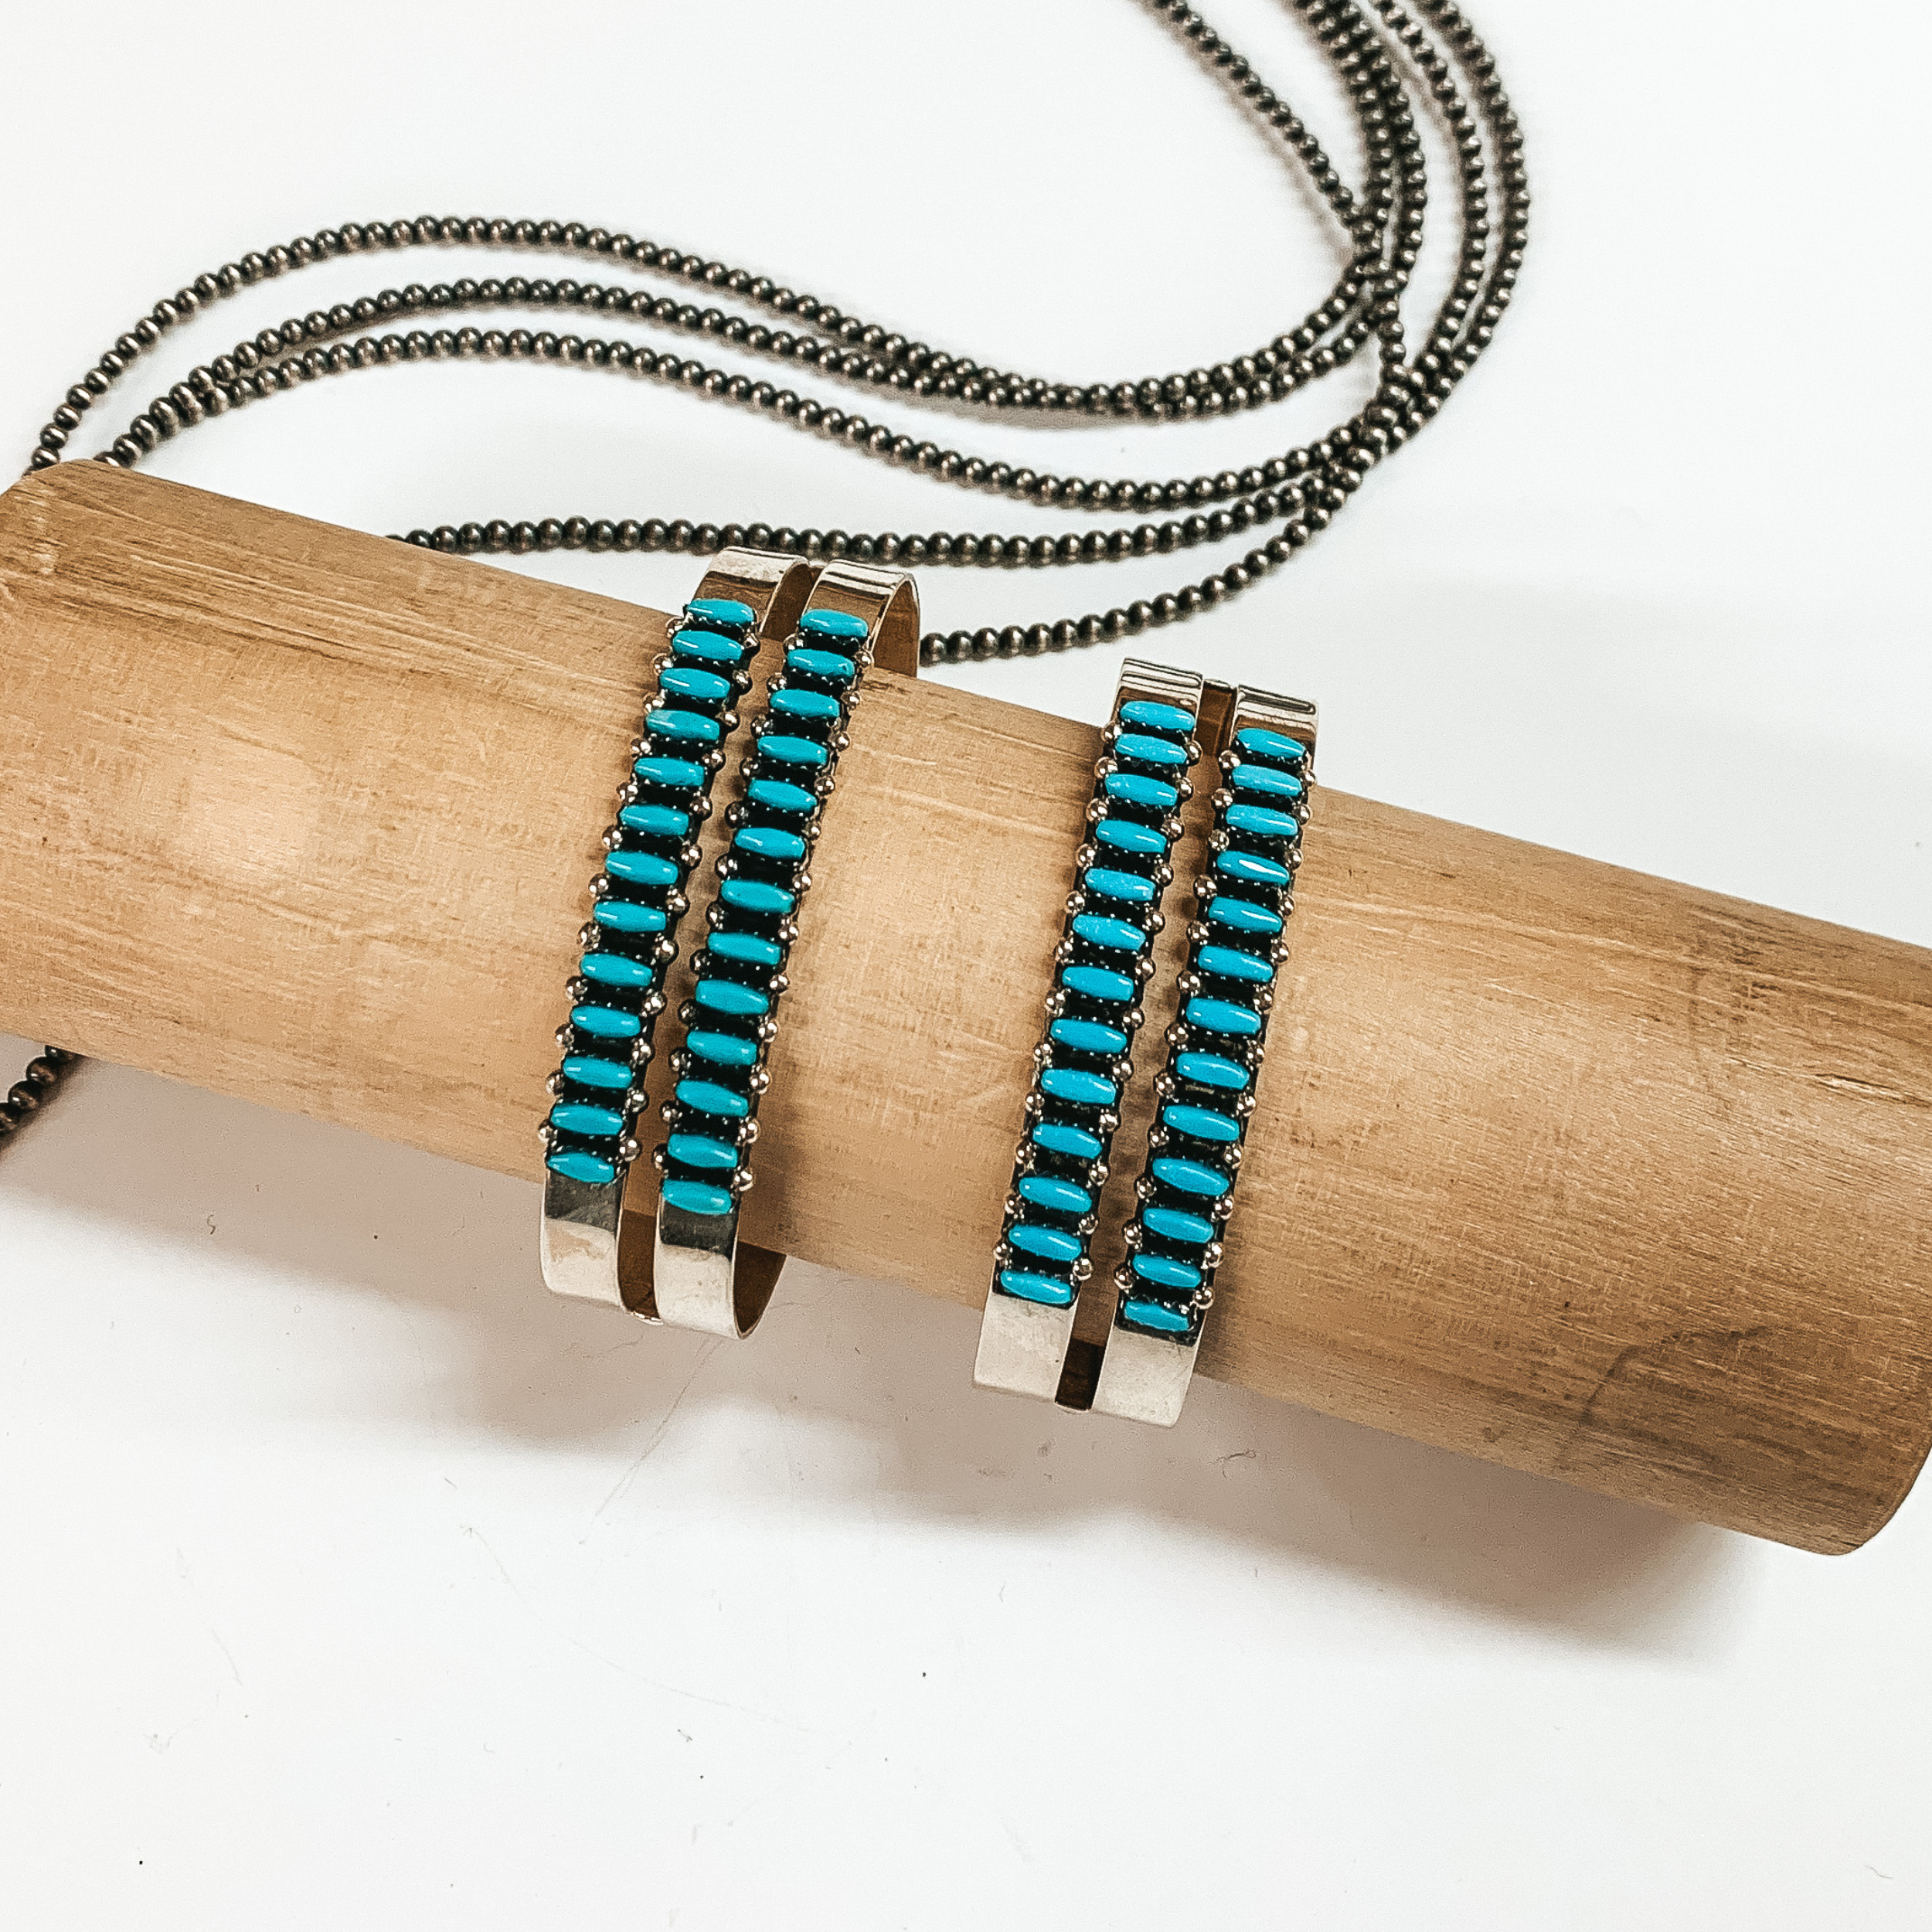 V Martz | Zuni Handmade Sterling Silver Double Cuff with Turquoise Stones - Giddy Up Glamour Boutique